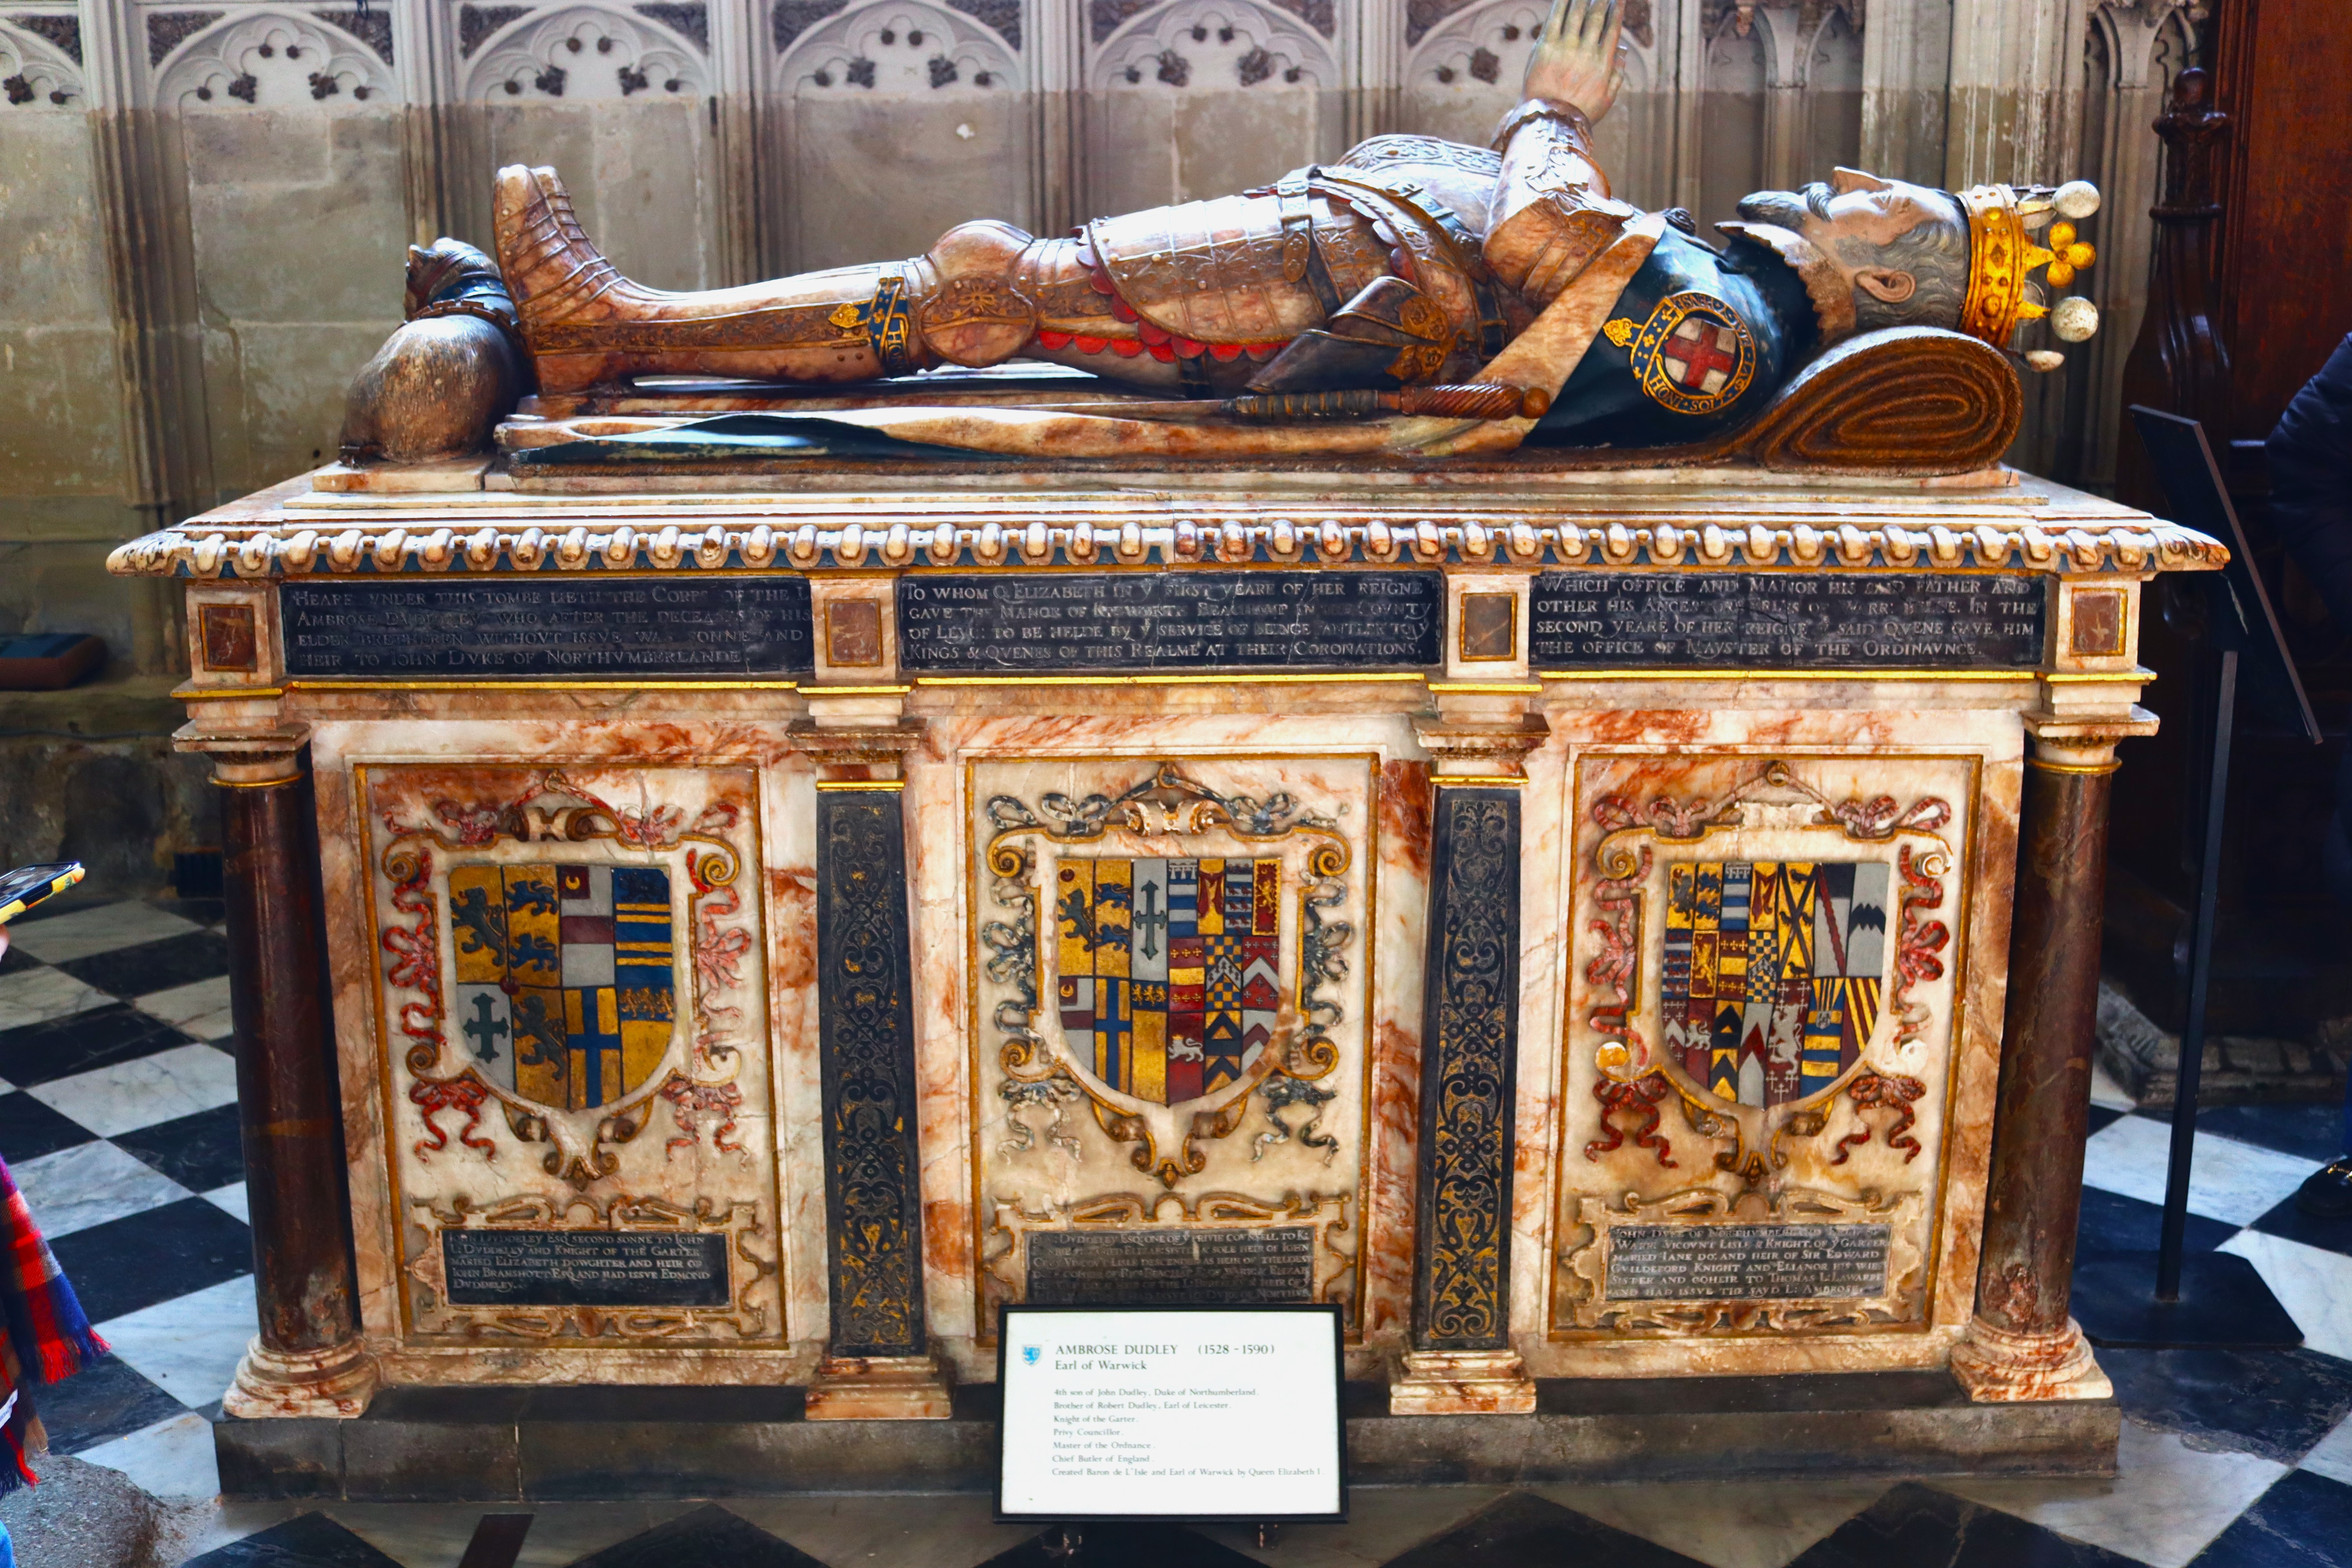 Tomb of Ambrose Dudley, Earl of Warwick (1528-1590) at St Mary's Church, Warwick